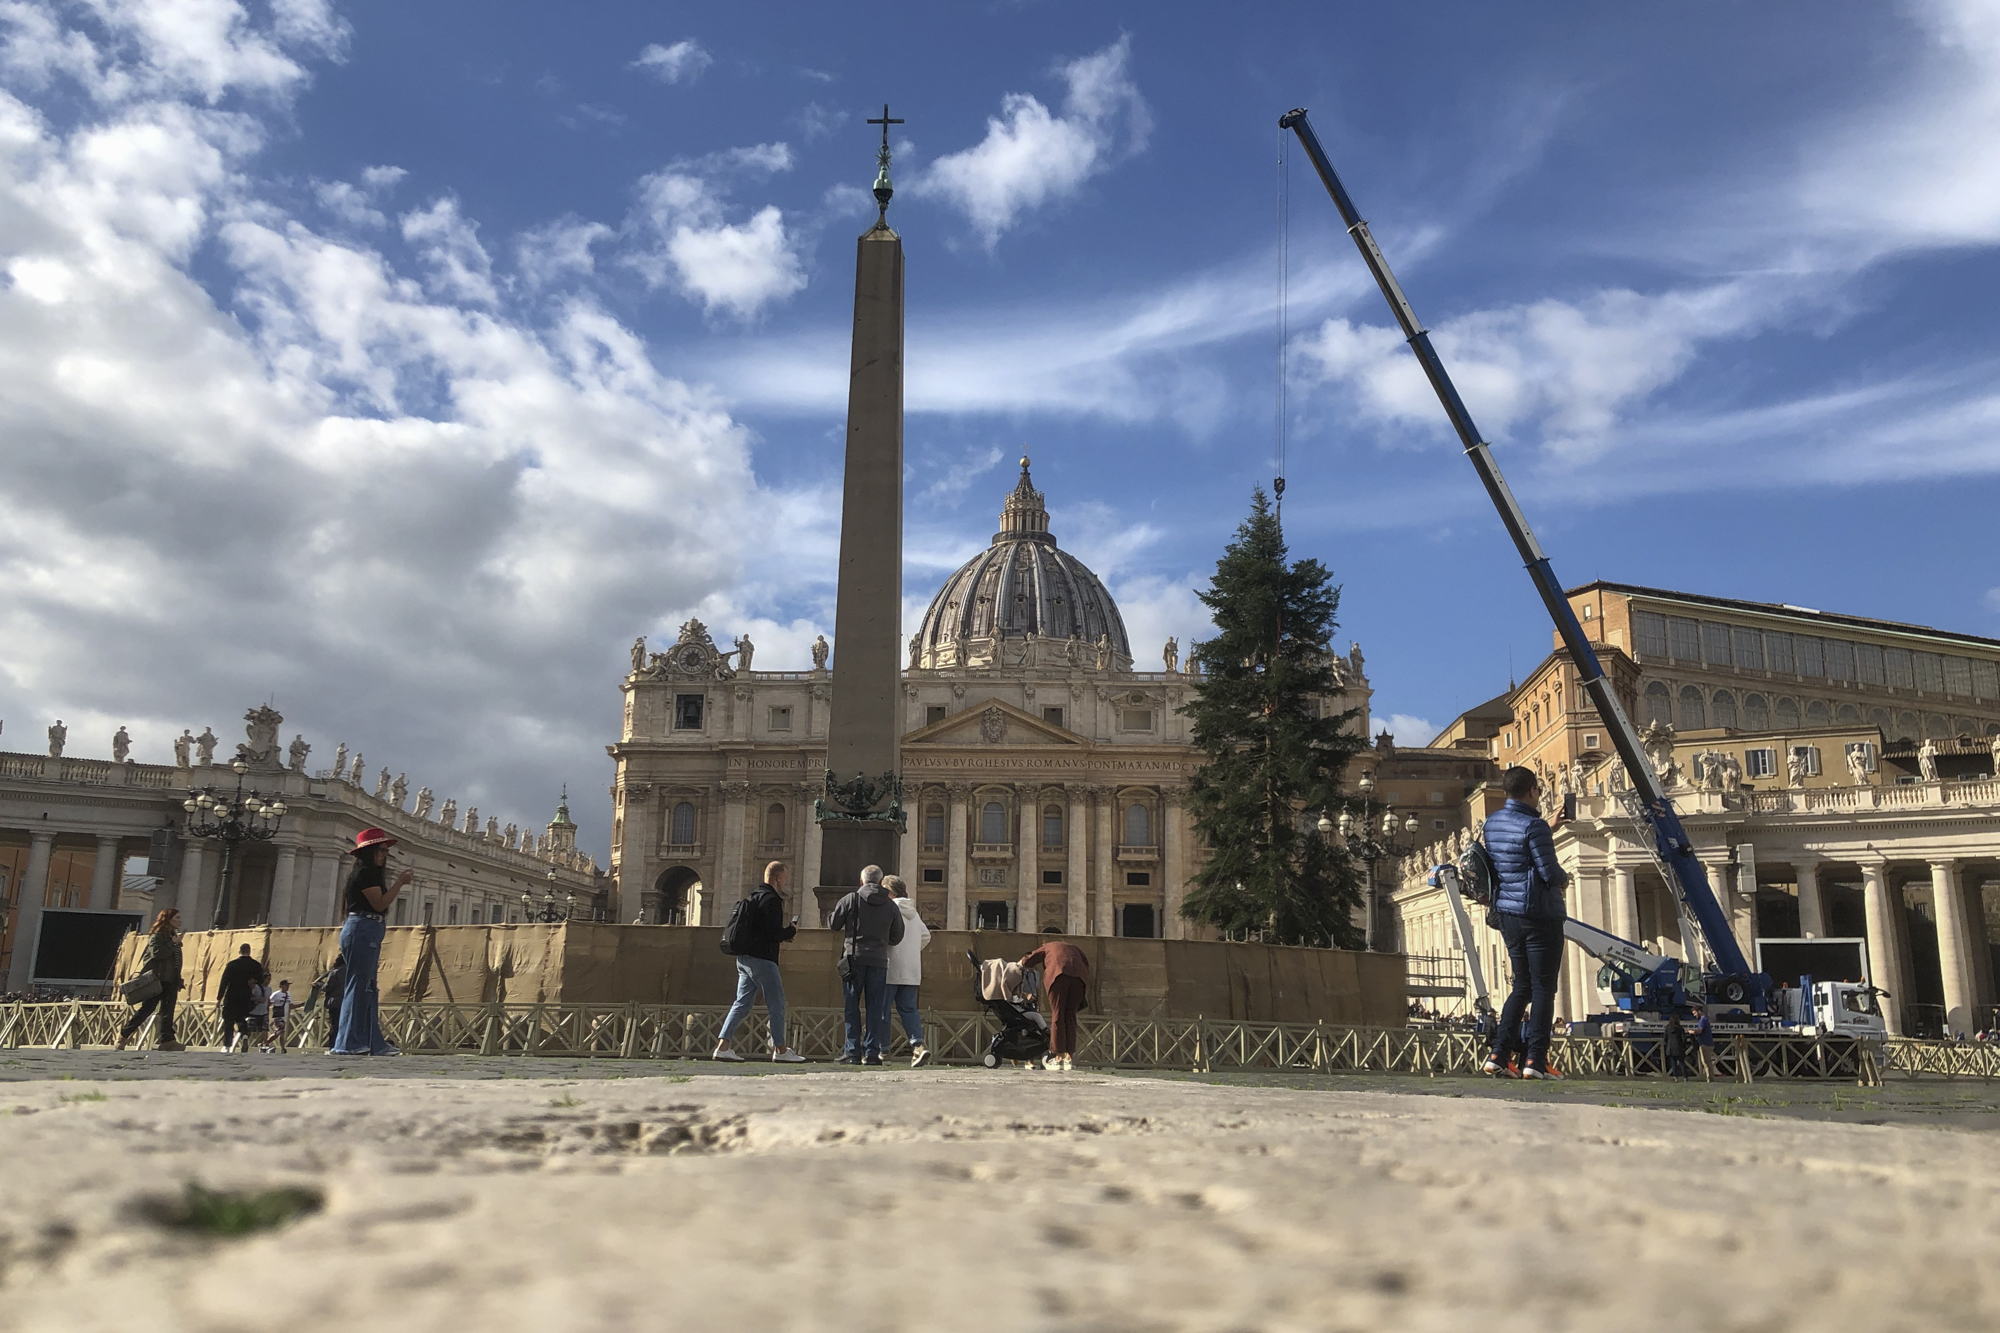 Workers-look-on-as-a-crane-lifts-a-Christmas-Tree-silver-fir-from-the-Abruzzo-region-into-position-at-St-Peters-Square